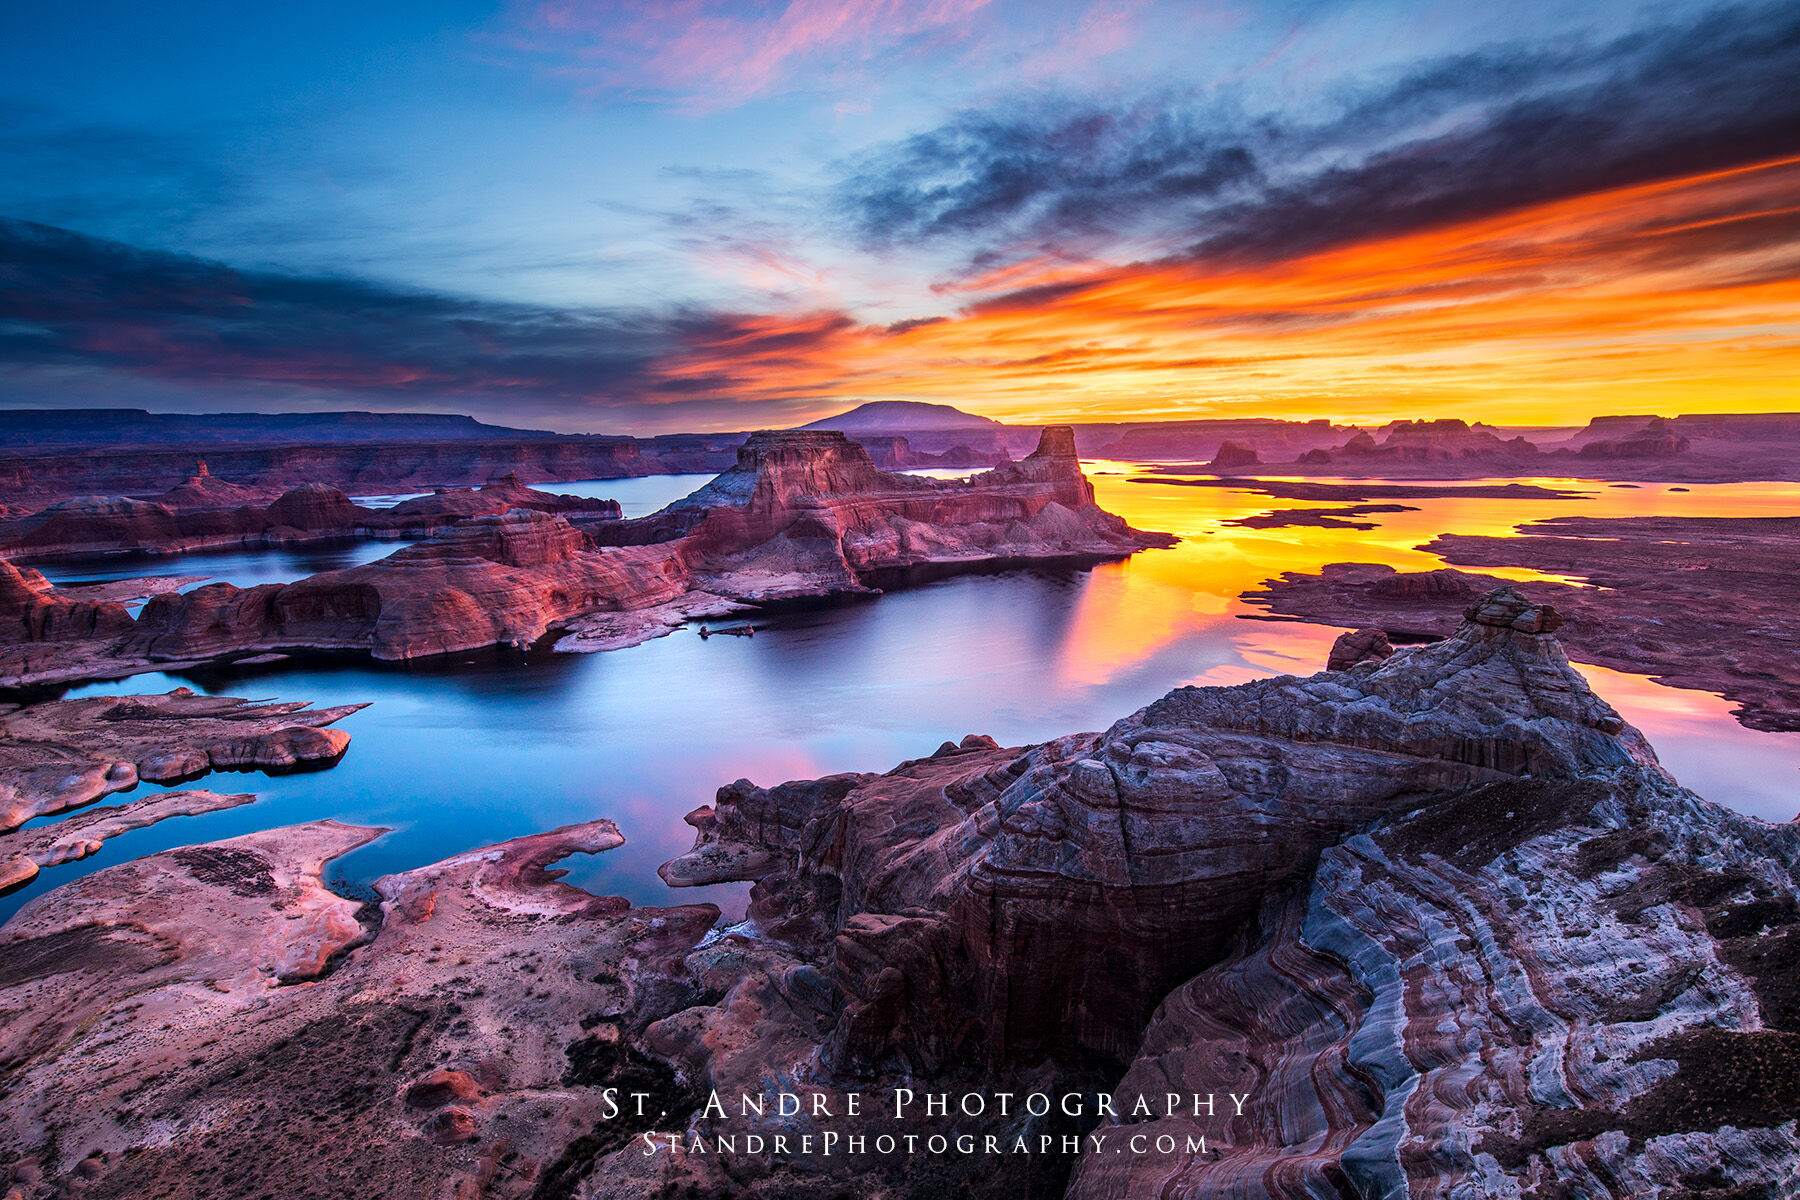 Alstrom point in Lake Powell at sunrise. Gunsight butte can be seen in the middle of padre bay